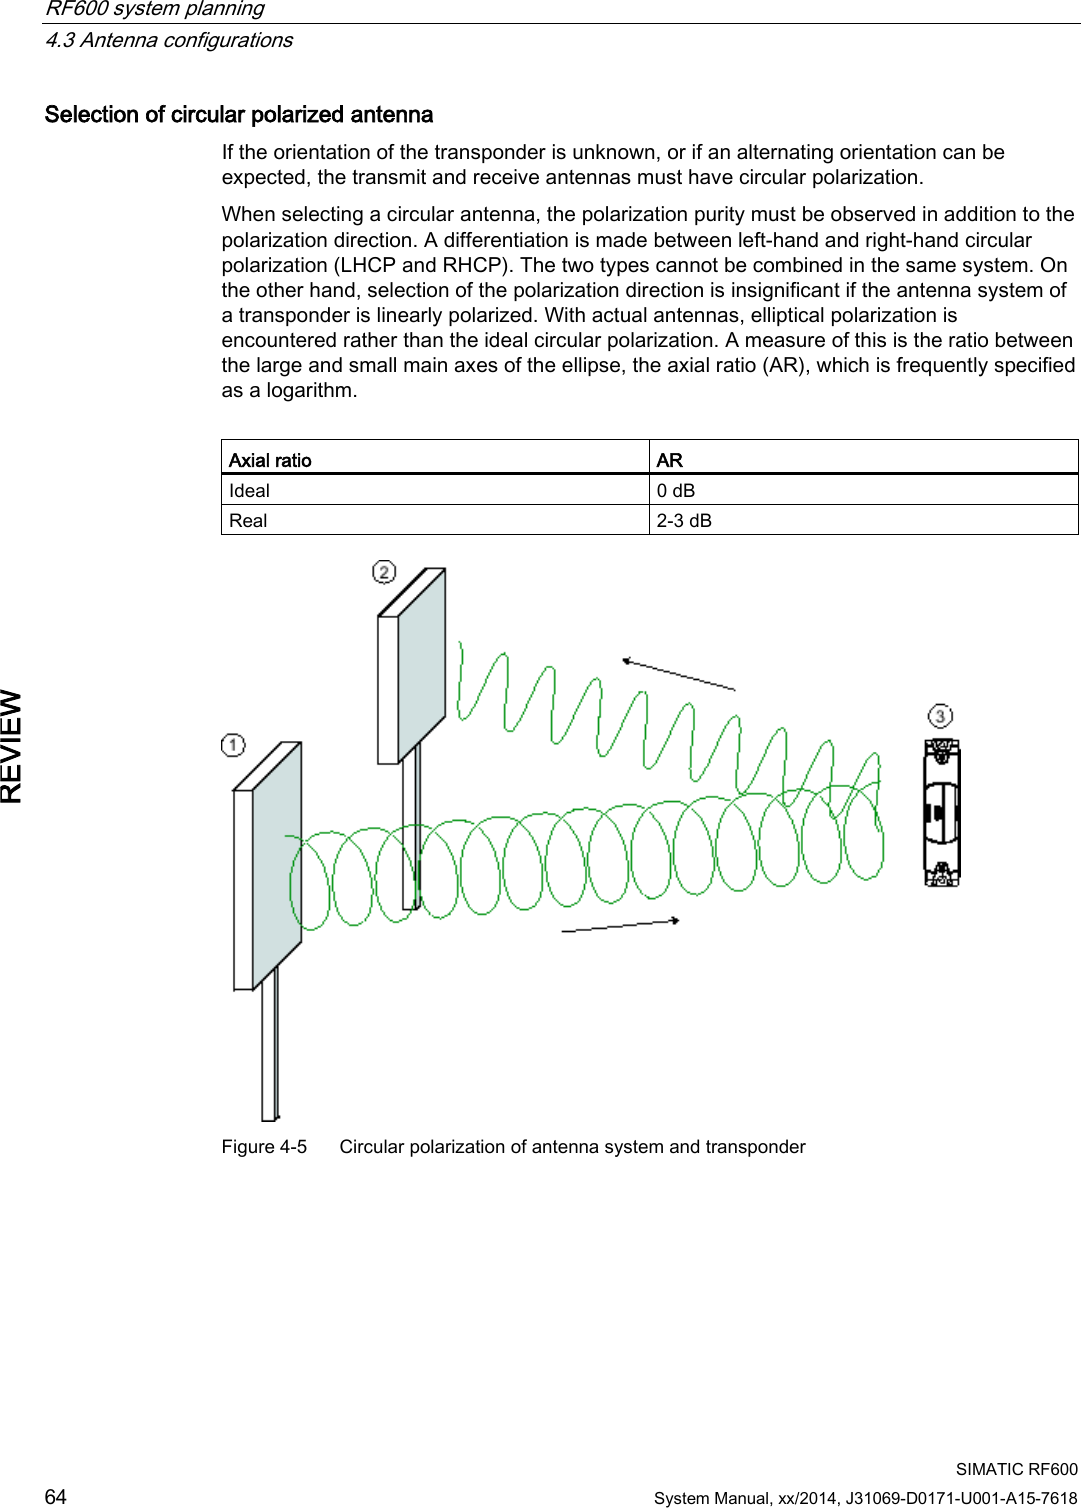 RF600 system planning   4.3 Antenna configurations  SIMATIC RF600 64 System Manual, xx/2014, J31069-D0171-U001-A15-7618 REVIEW Selection of circular polarized antenna If the orientation of the transponder is unknown, or if an alternating orientation can be expected, the transmit and receive antennas must have circular polarization. When selecting a circular antenna, the polarization purity must be observed in addition to the polarization direction. A differentiation is made between left-hand and right-hand circular polarization (LHCP and RHCP). The two types cannot be combined in the same system. On the other hand, selection of the polarization direction is insignificant if the antenna system of a transponder is linearly polarized. With actual antennas, elliptical polarization is encountered rather than the ideal circular polarization. A measure of this is the ratio between the large and small main axes of the ellipse, the axial ratio (AR), which is frequently specified as a logarithm.  Axial ratio AR Ideal 0 dB Real 2-3 dB  Figure 4-5  Circular polarization of antenna system and transponder 